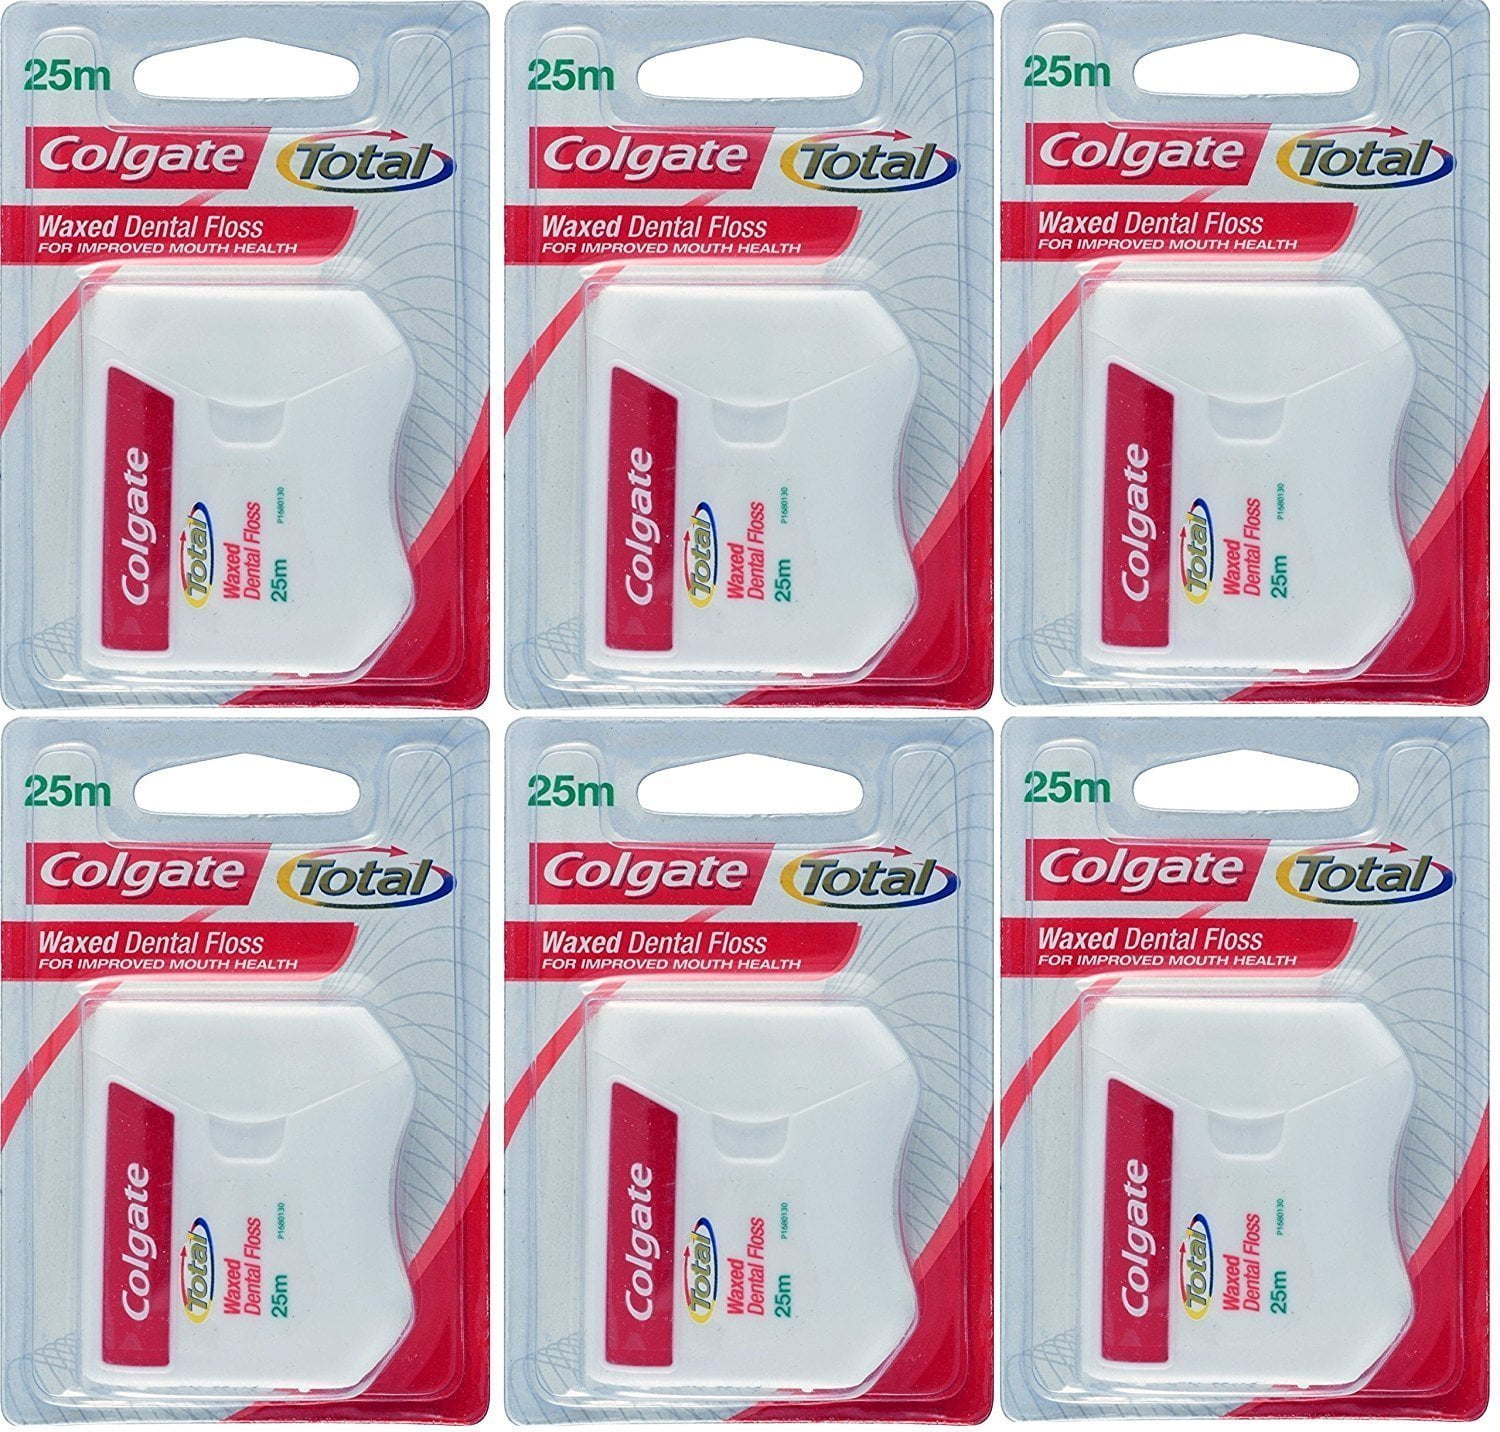 Colgate Waxed Dental Floss For Improved Mouth Health - of 6 (25Mtr Per Pack) - Walmart.com